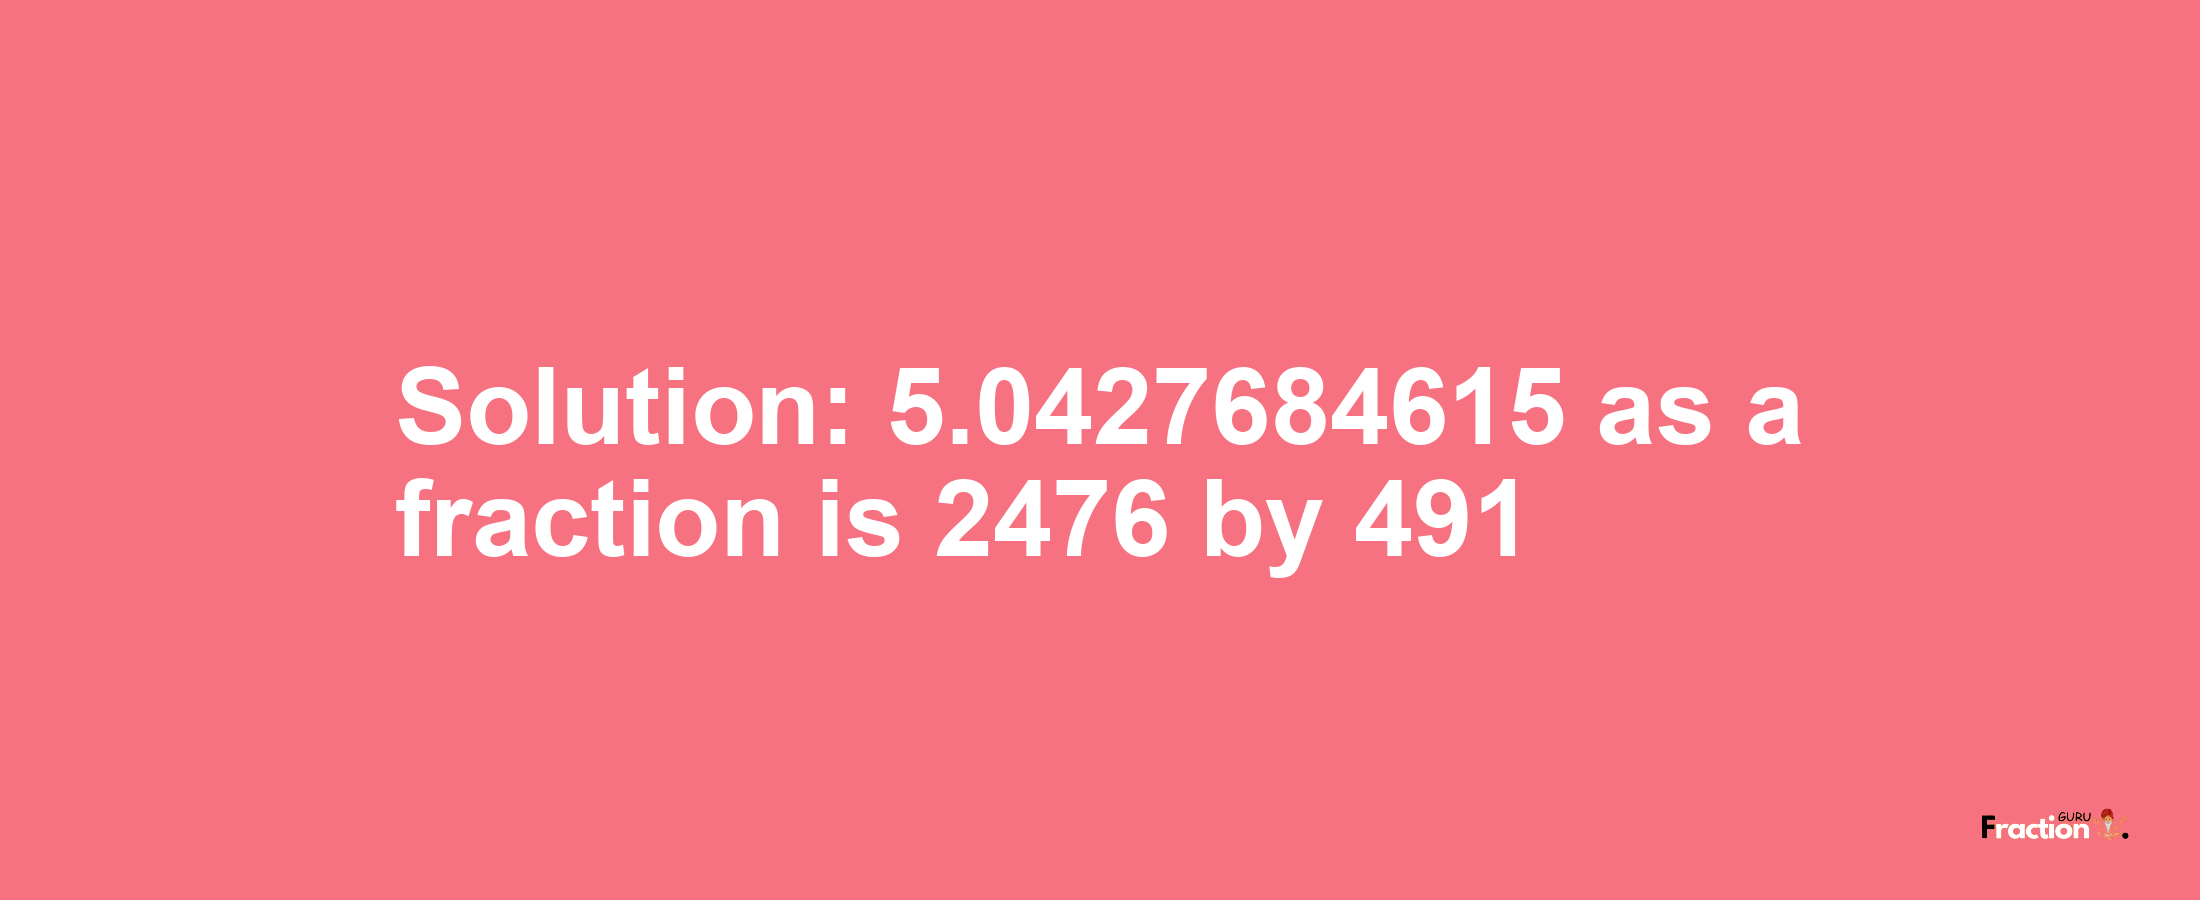 Solution:5.0427684615 as a fraction is 2476/491